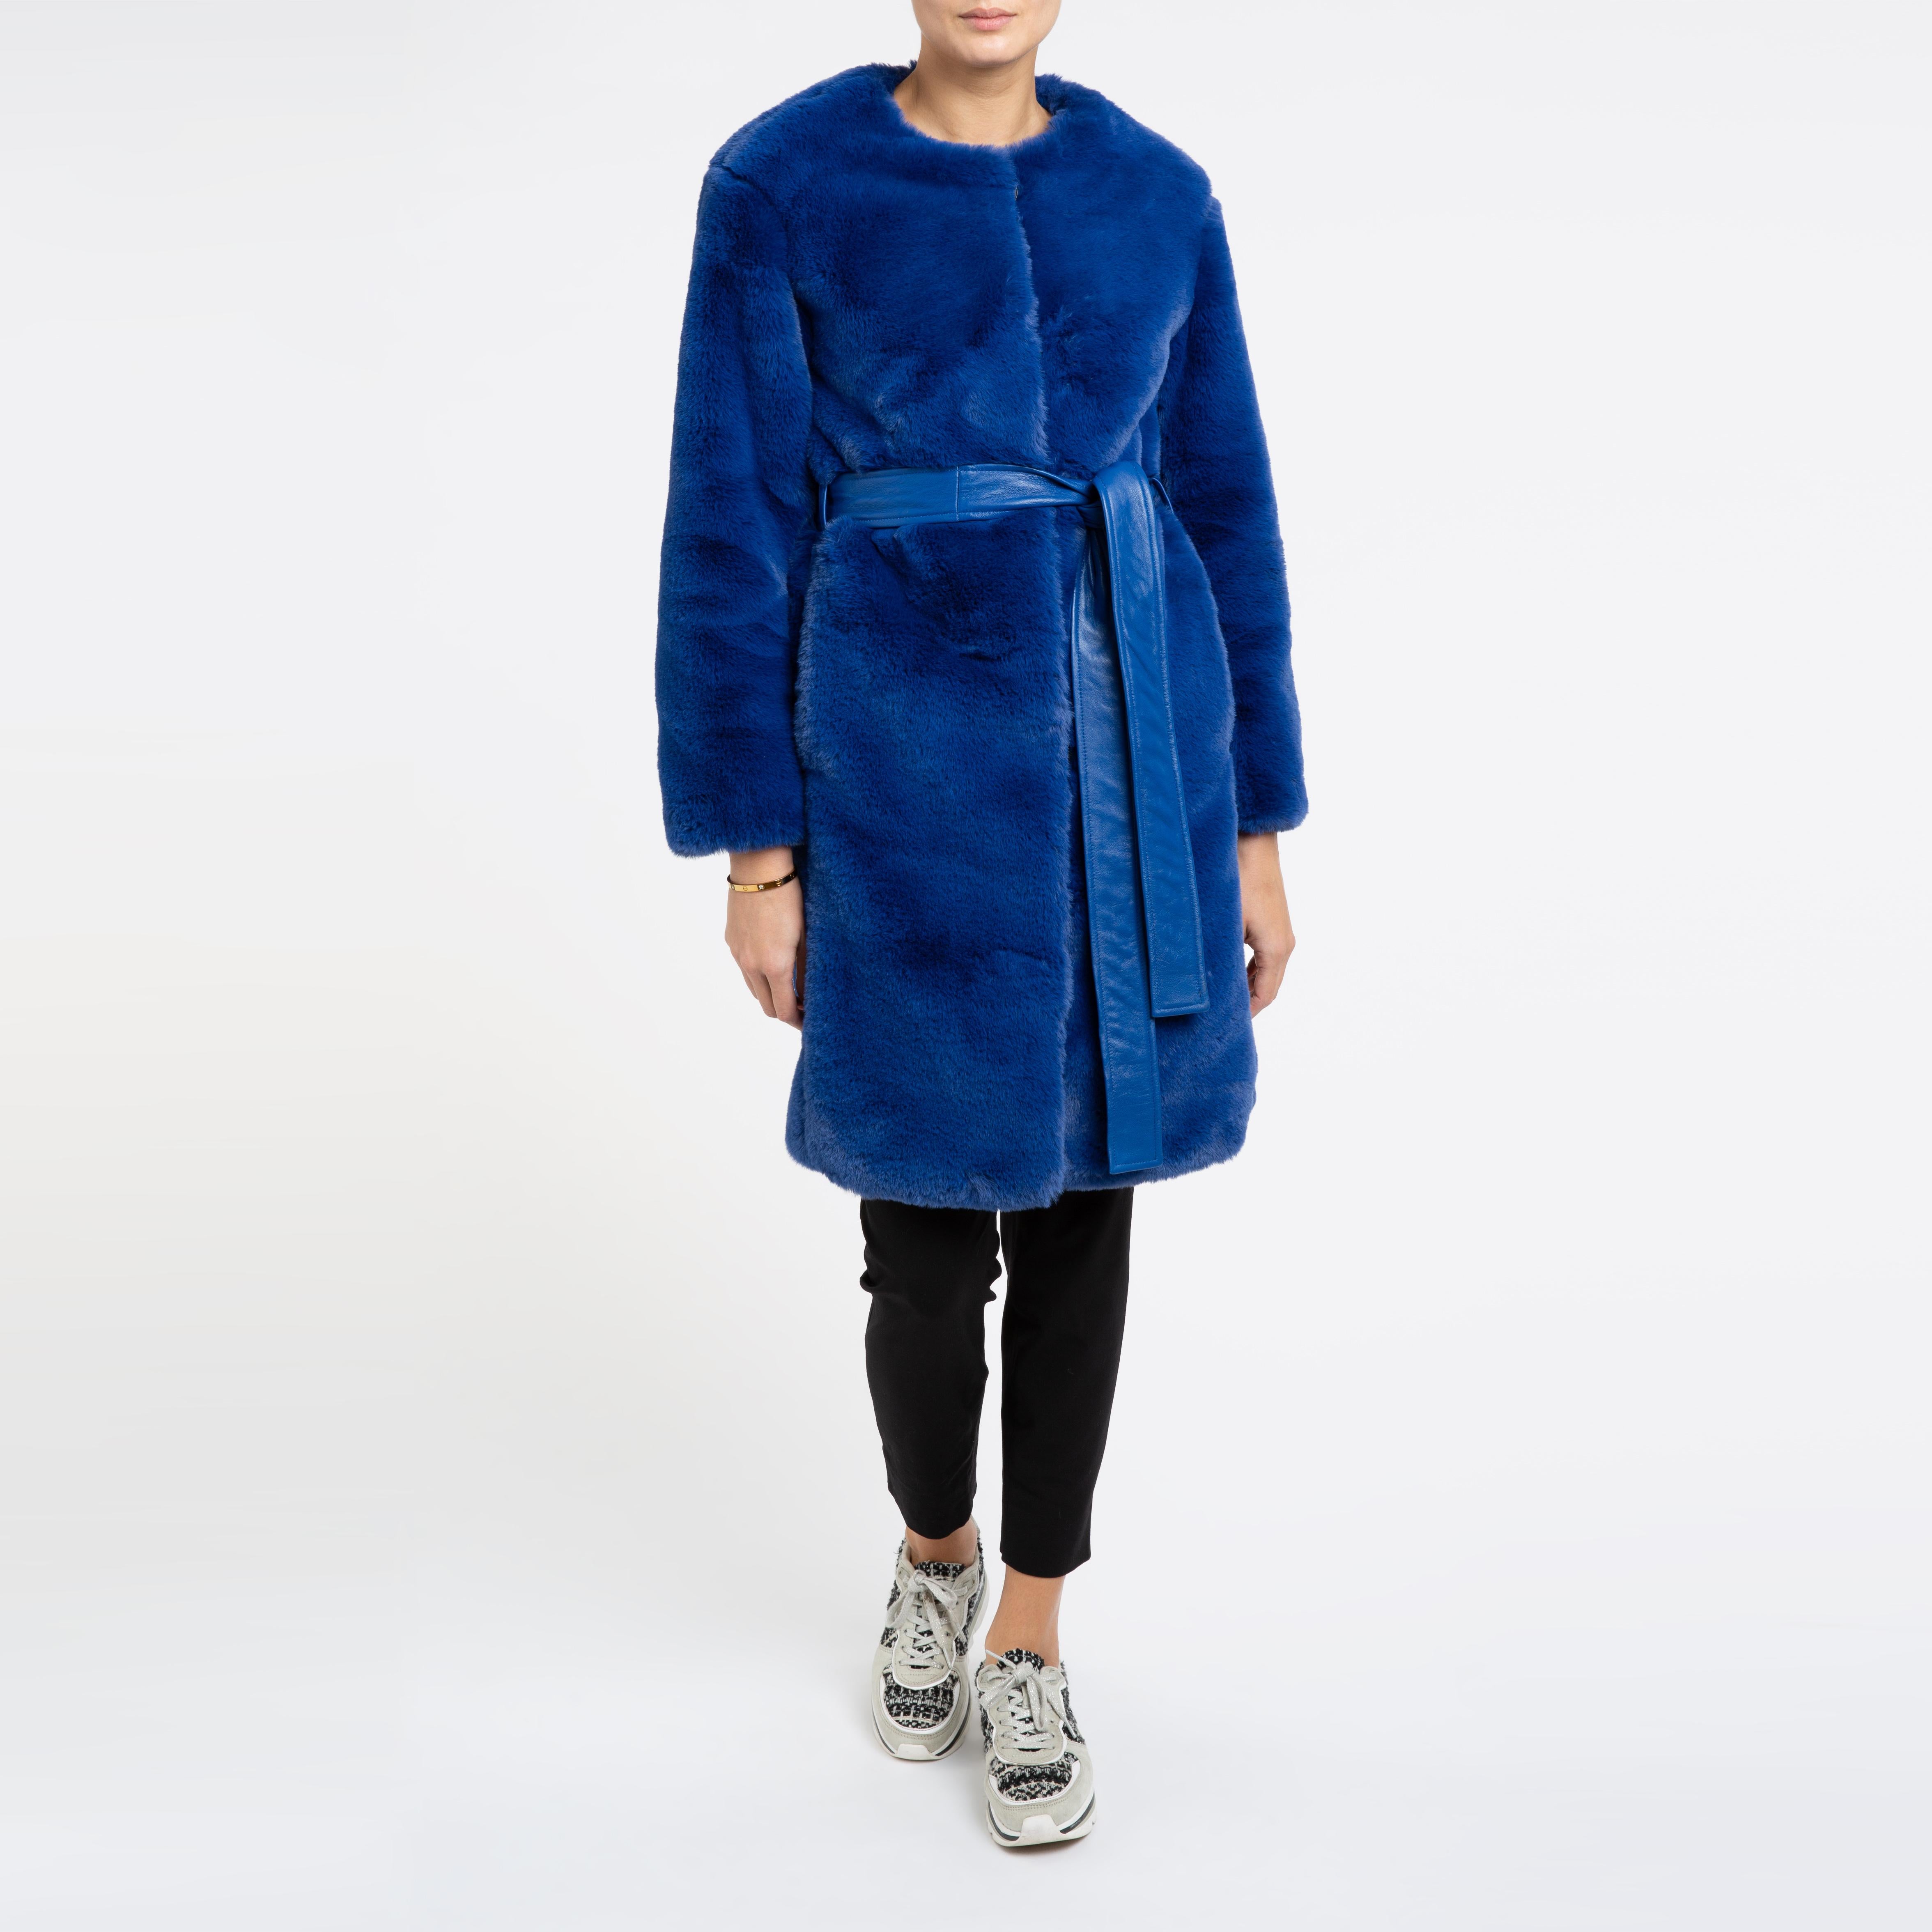 Verheyen London Serena  Collarless Faux Fur Coat in Blue - Size uk 12

Handmade in London, made with the highest quality faux fur on the market - you wouldn't even know it was fake, its that good. This luxury item is an investment piece to wear for